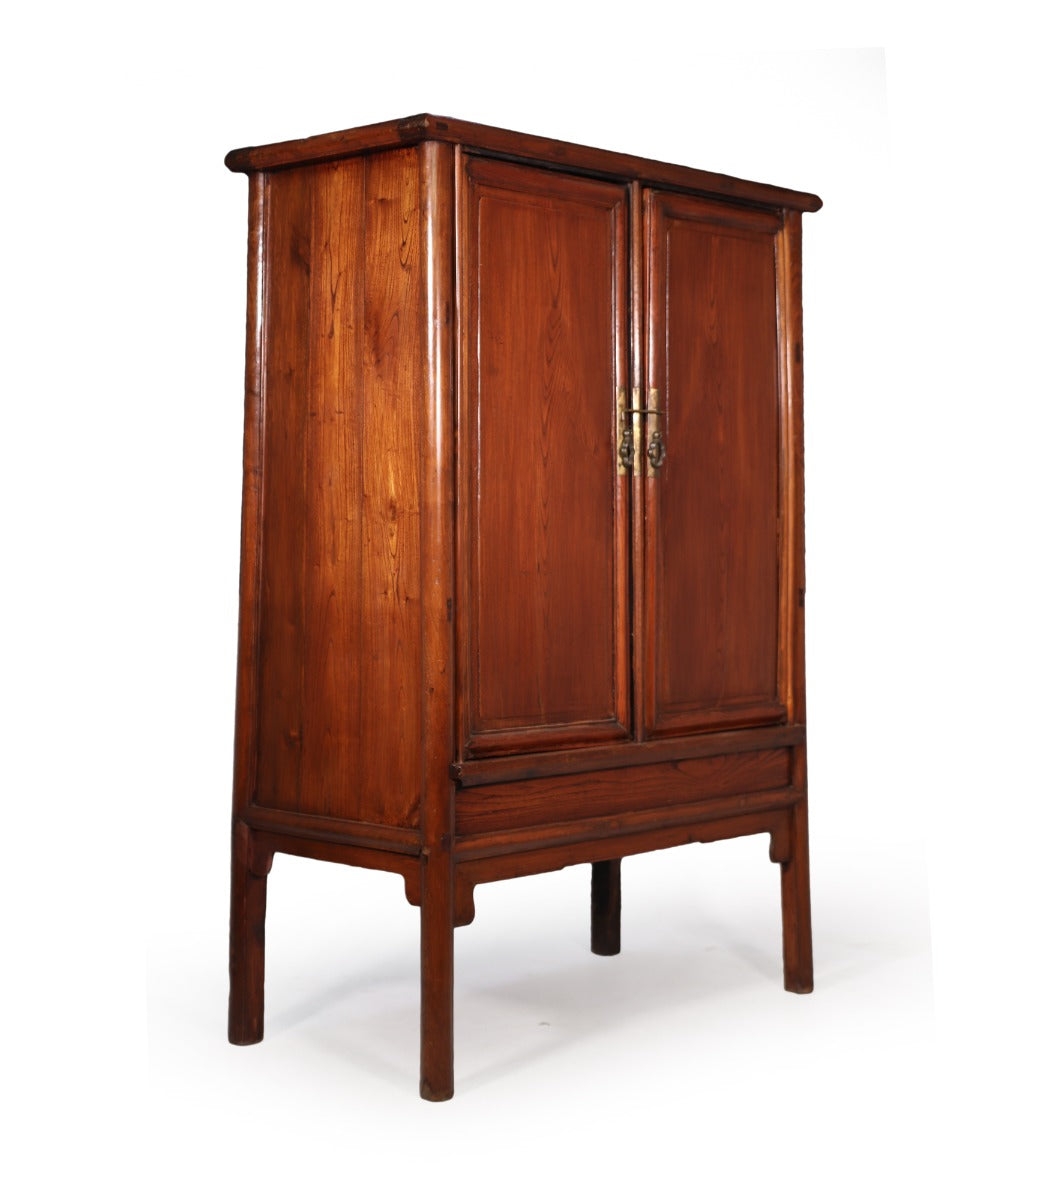 18th Century Chinese Hardwood Tapered Cabinet – The Furniture Rooms